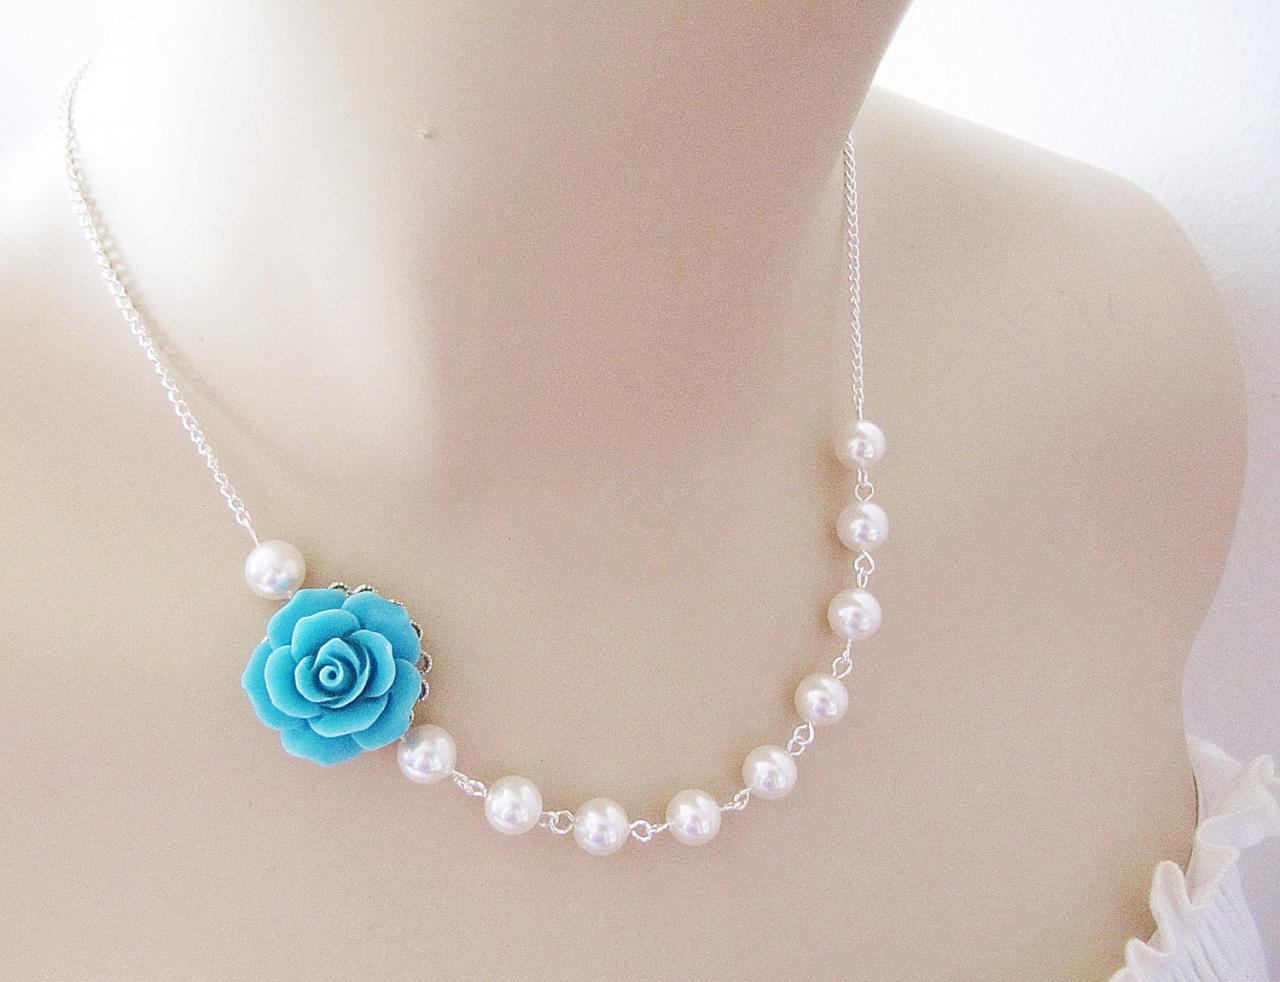 SET of 3 - Wedding Bridesmaid Necklaces Light Turquoise Blue Rose Flower Cabochon and Crystal White Swarovski Pearls Bridal Necklace